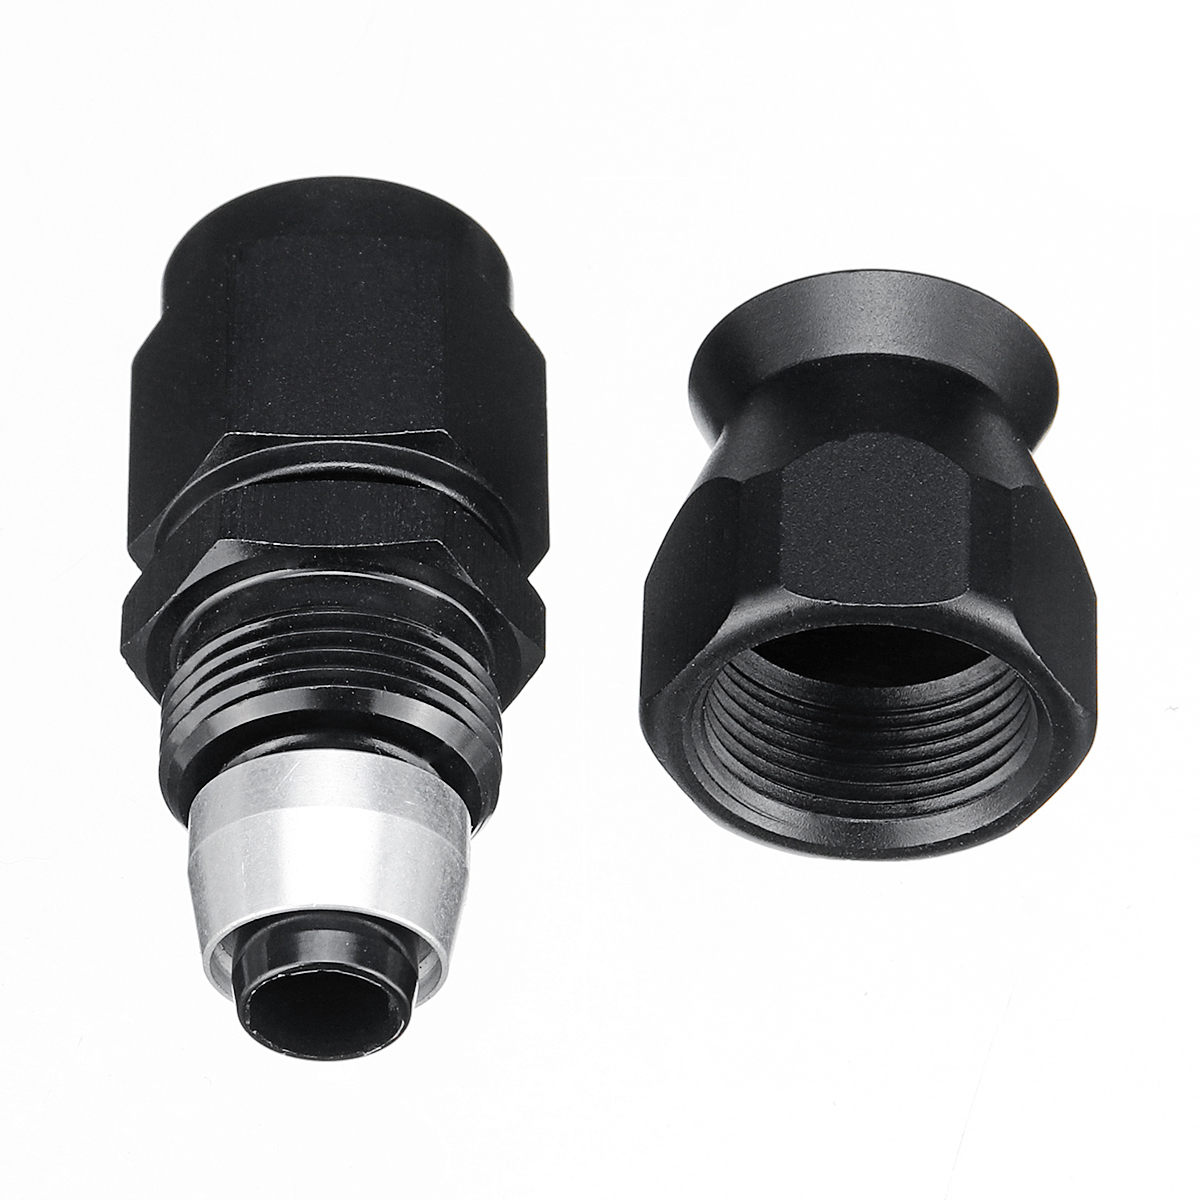 AN-6-Straight-Stealth-Black-Fuel-Hose-Pipes-Fittings-AN6-Connector-1361067-5